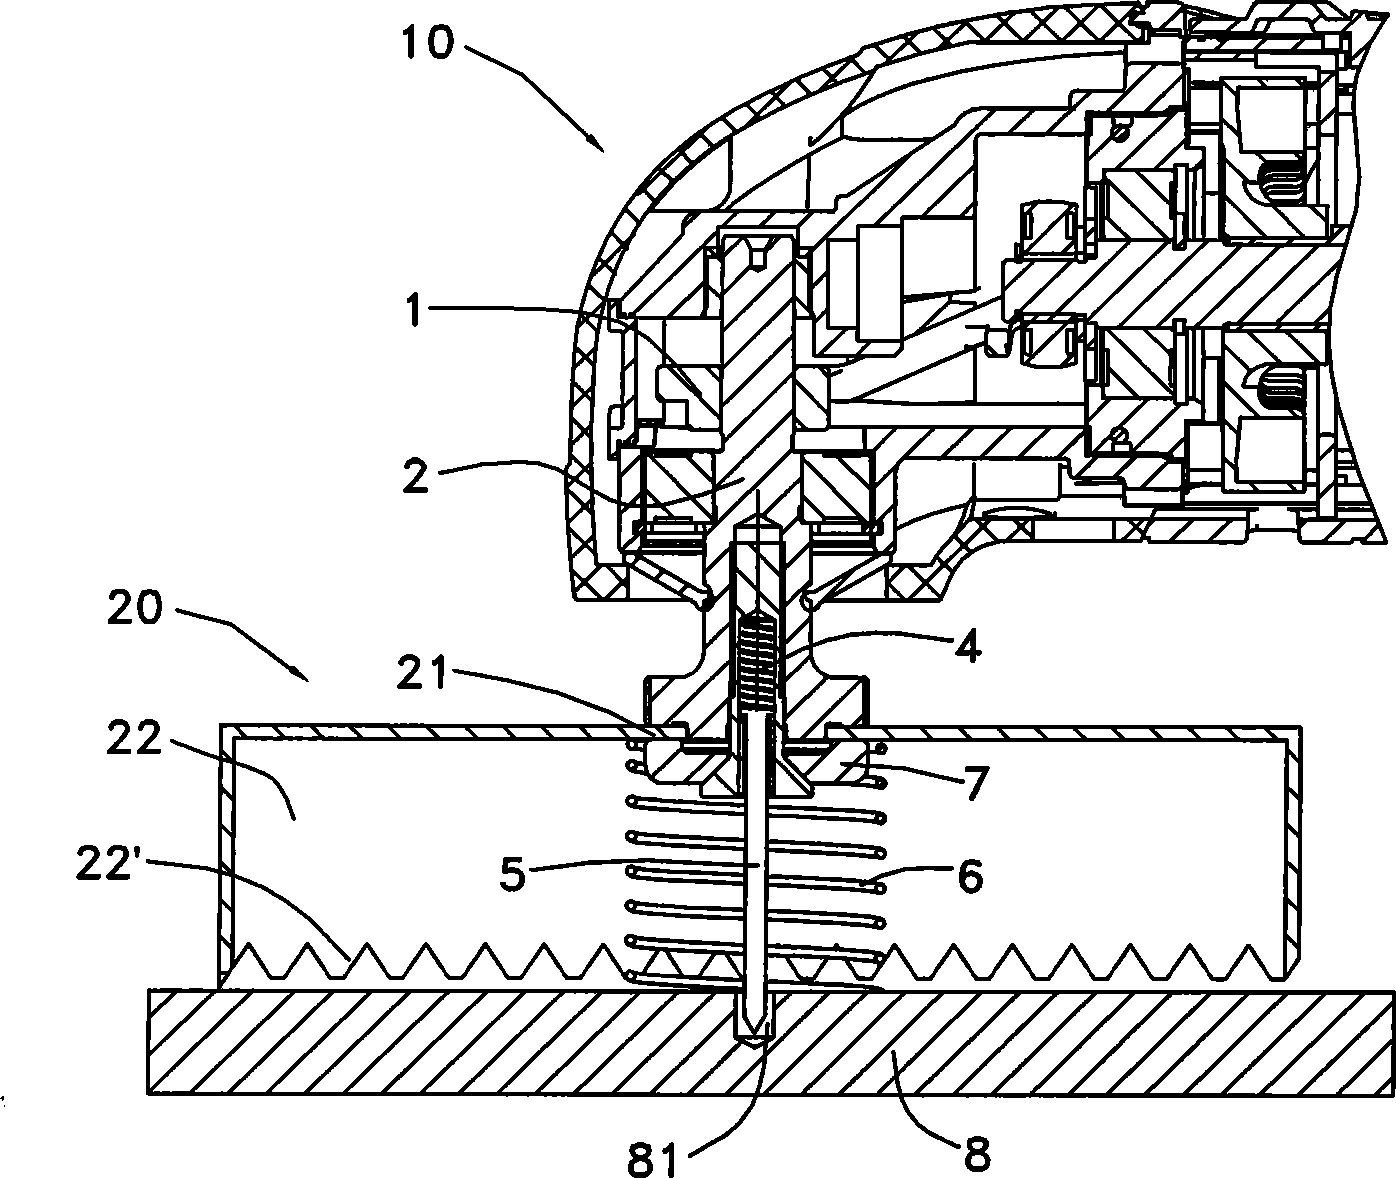 Tapper used for oscillation tool